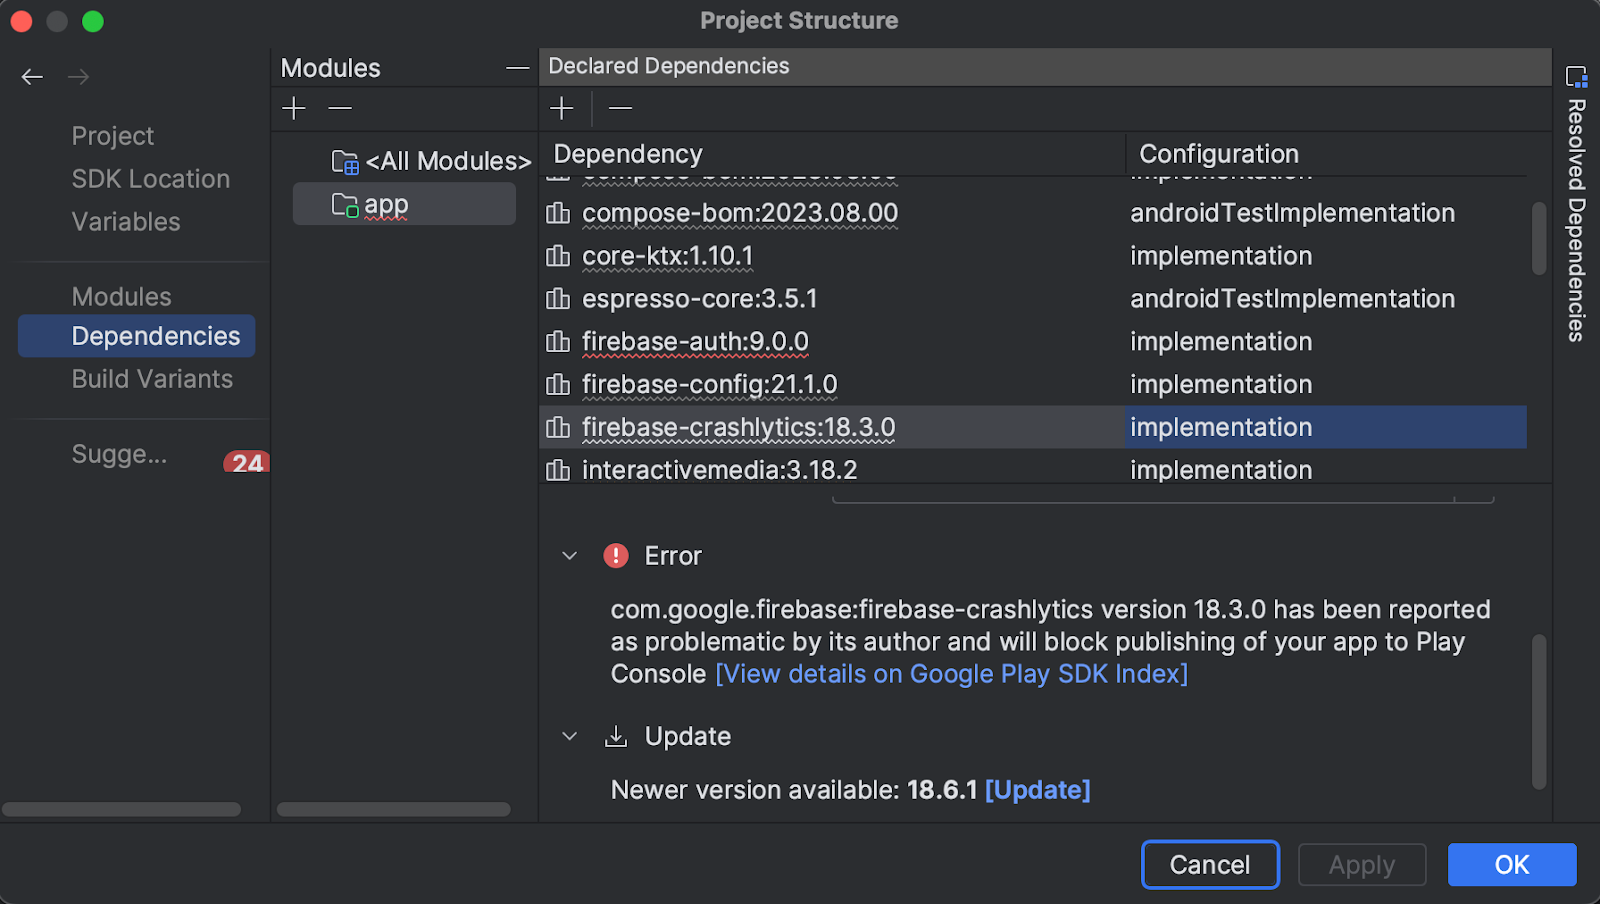 Android Studio's project structure dialog showing a warning from the Google Play SDK Index